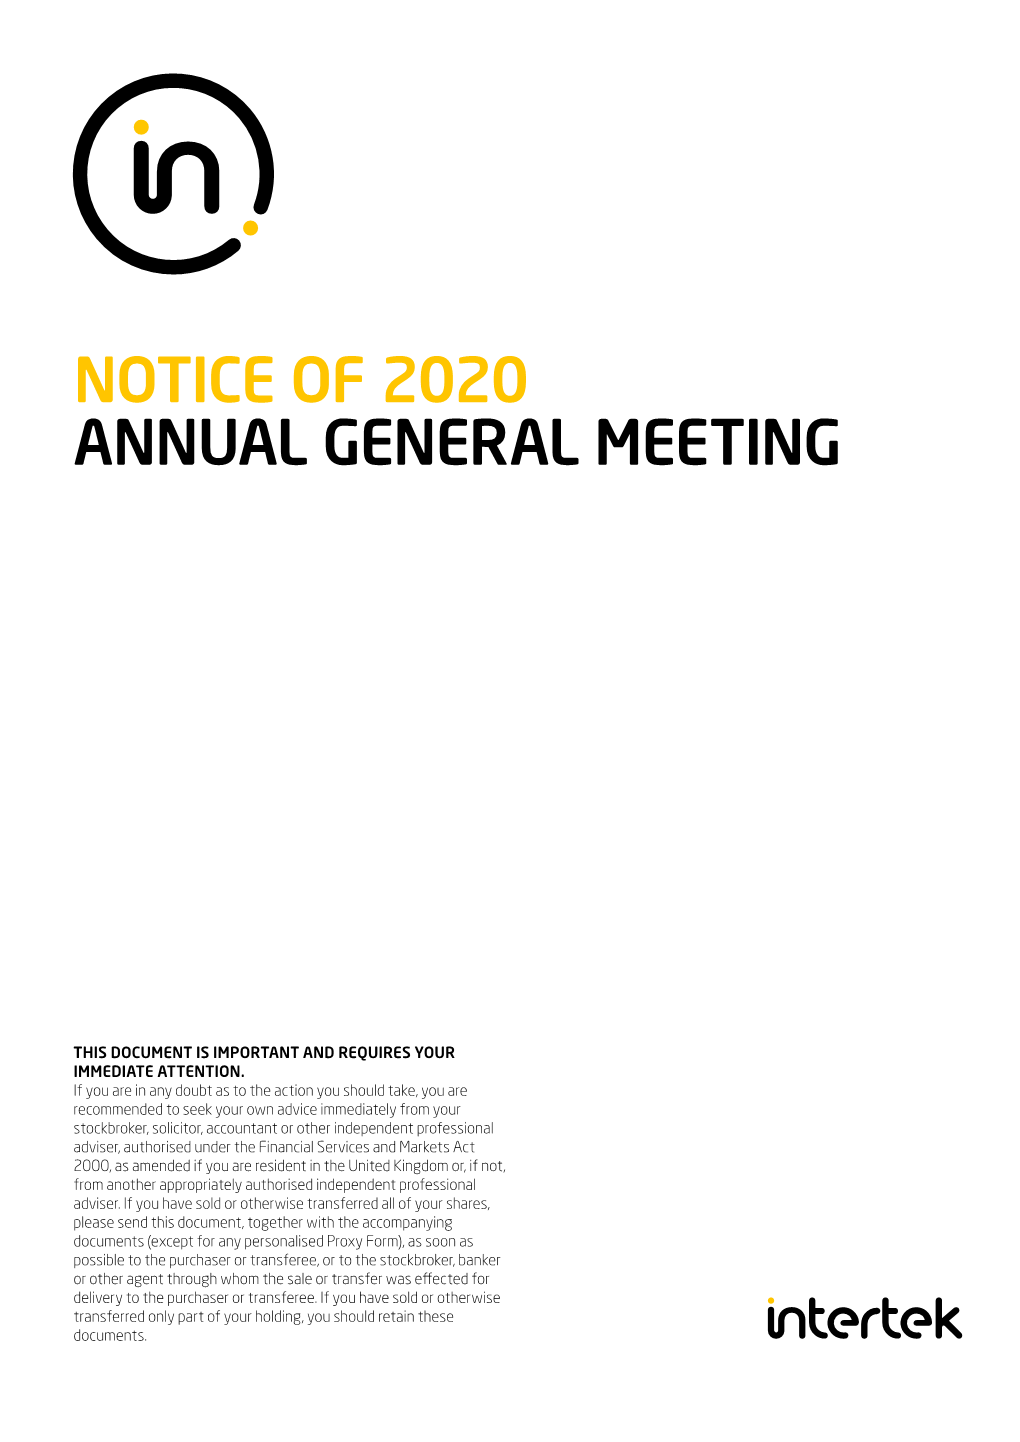 Notice of 2020 Annual General Meeting